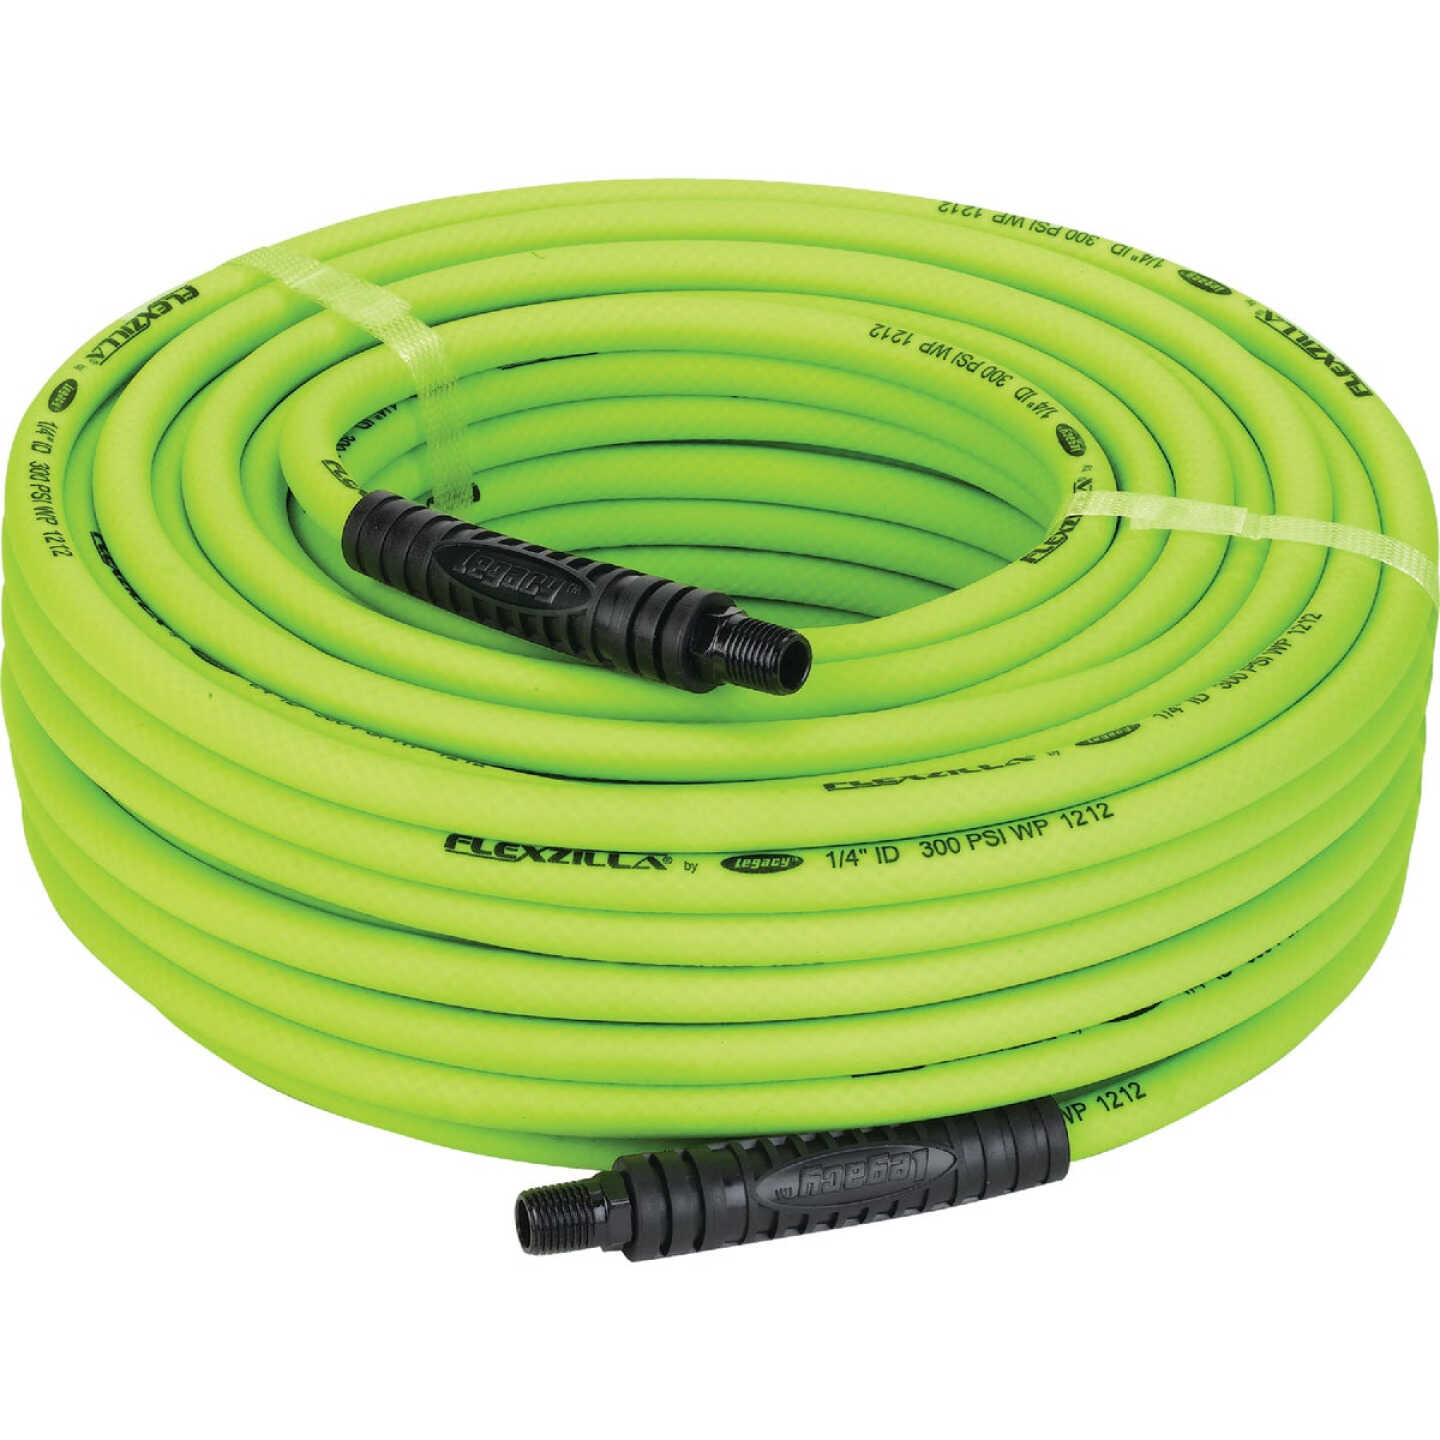 Flexzilla 1/4 In. x 100 Ft. Polymer-Blend Air Hose with 1/4 In. MNPT  Fittings - Brownsboro Hardware & Paint